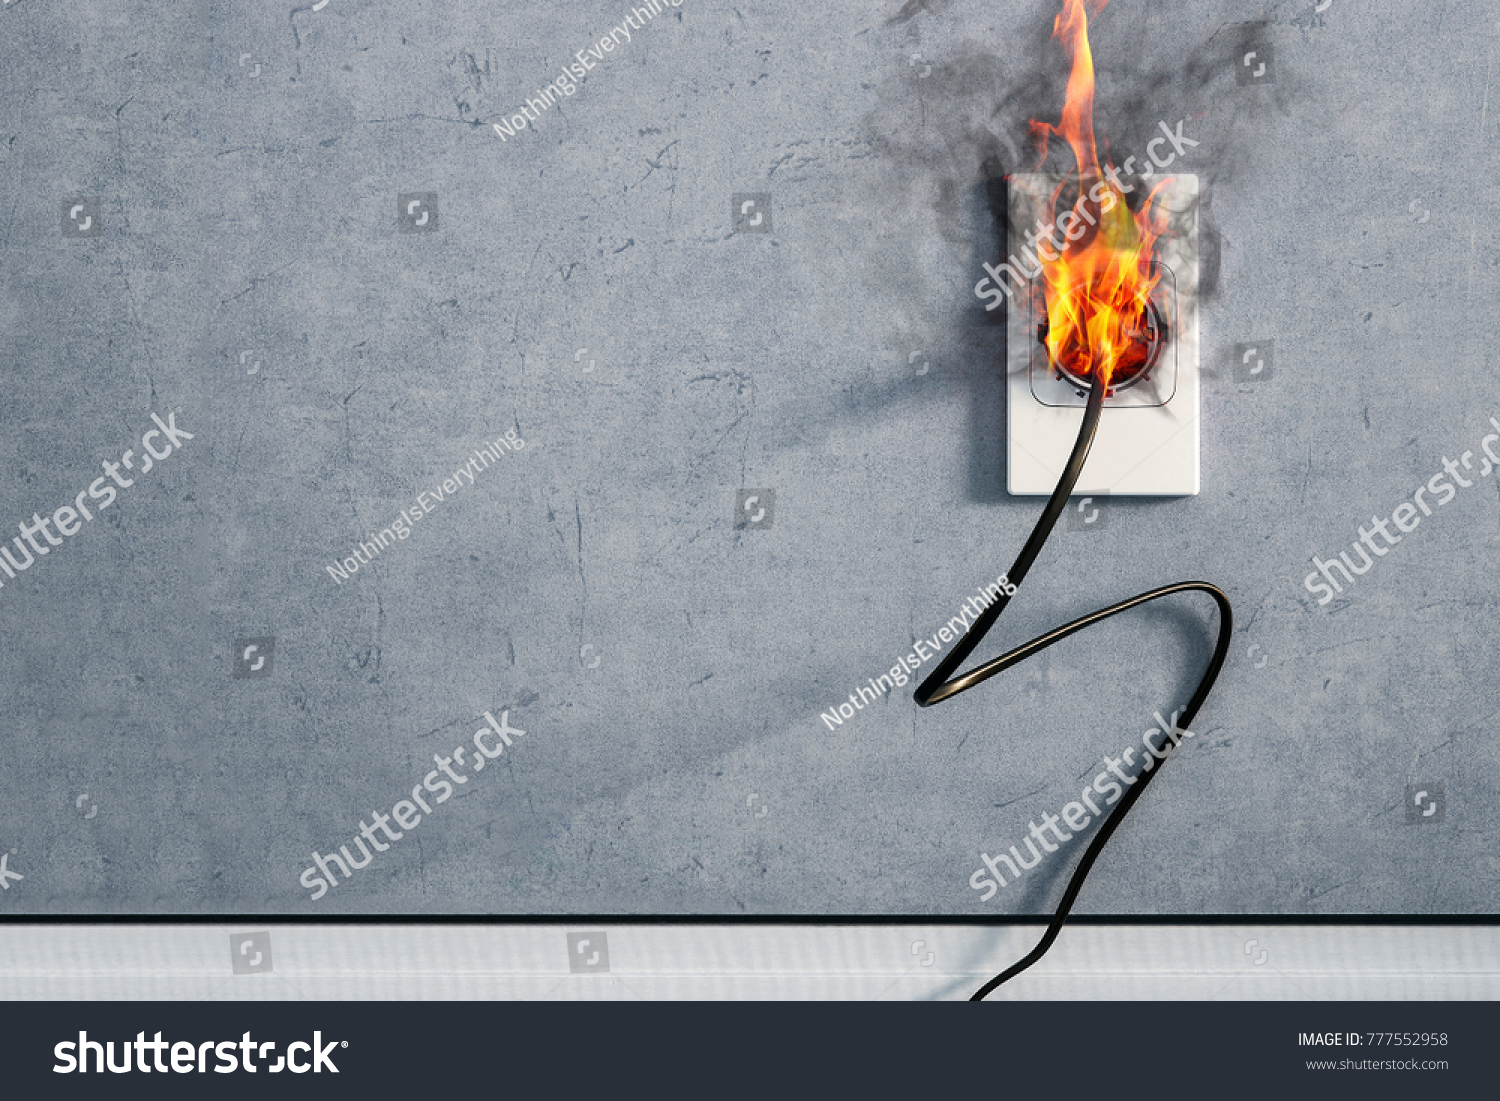 fire and smoke on electric wire plug in indoor, electric short circuit causing fire on plug socket #777552958